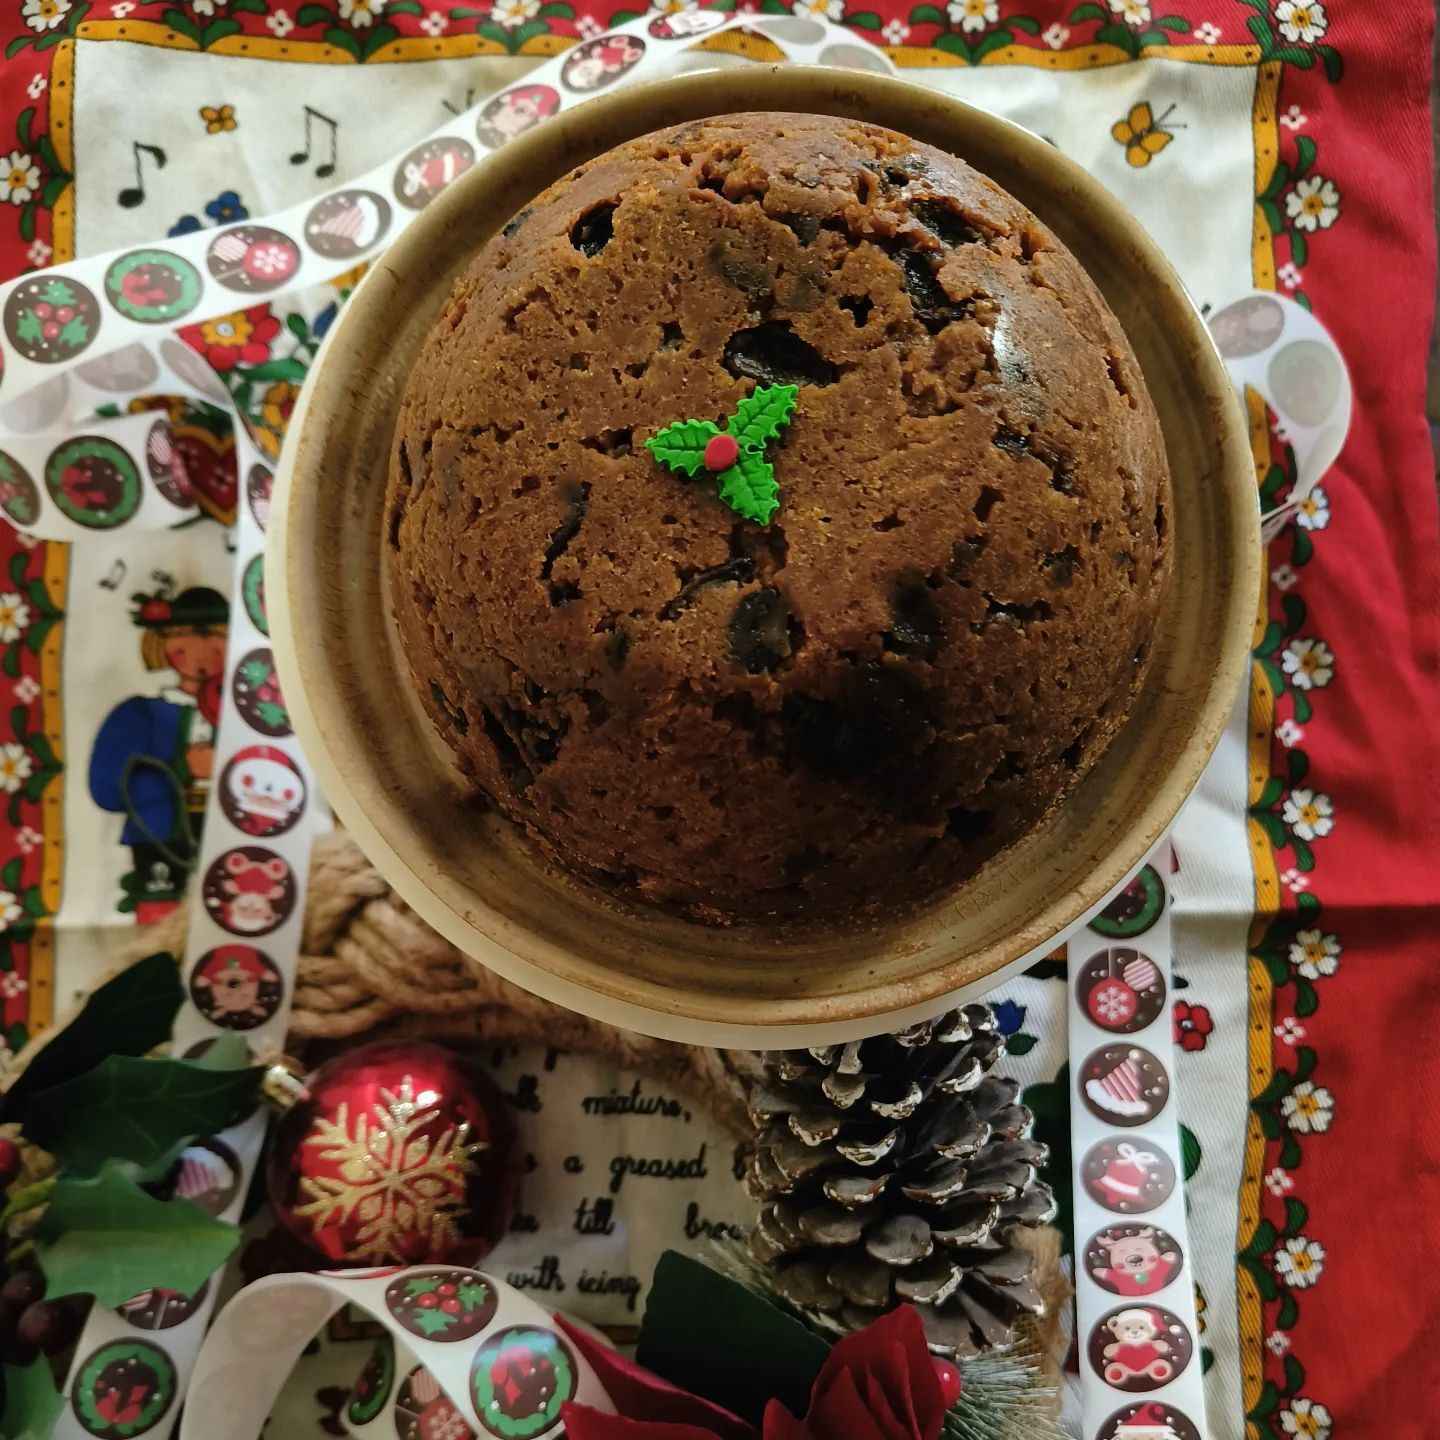 A traditional Christmas cake soaked in rum and made with fruits